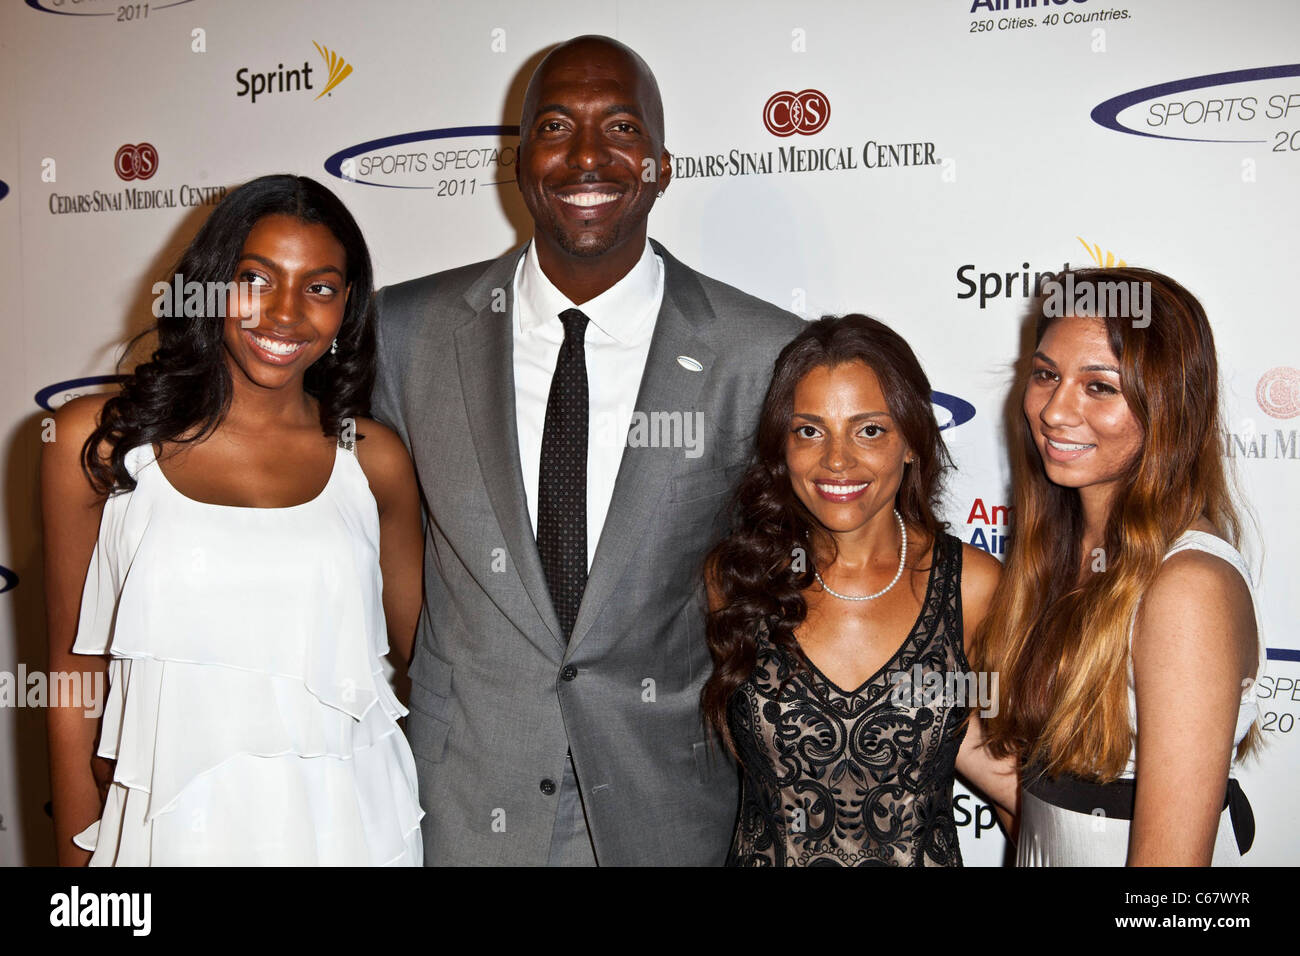 John Salley at arrivals for 26th Anniversary Sports Spectacular, Hyatt Regency Century Plaza Hotel, Los Angeles, CA May 22, 2011. Photo By: Emiley Schweich/Everett Collection Stock Photo